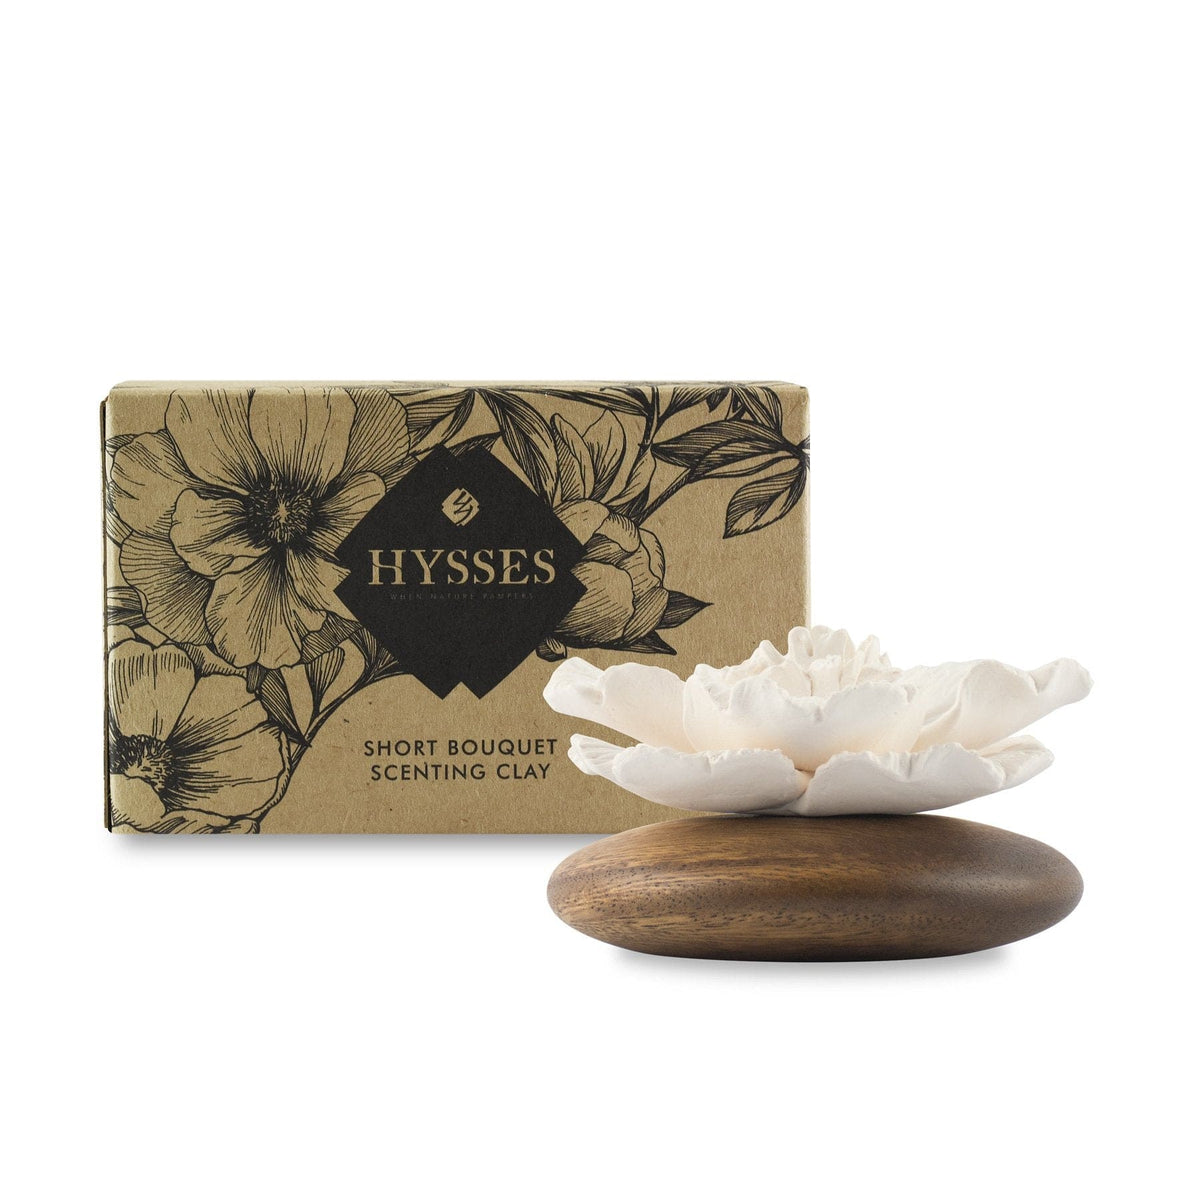 Hysses Home Scents Default Anemone Flower Scenting Clay Diffuser (Short Bouquet)